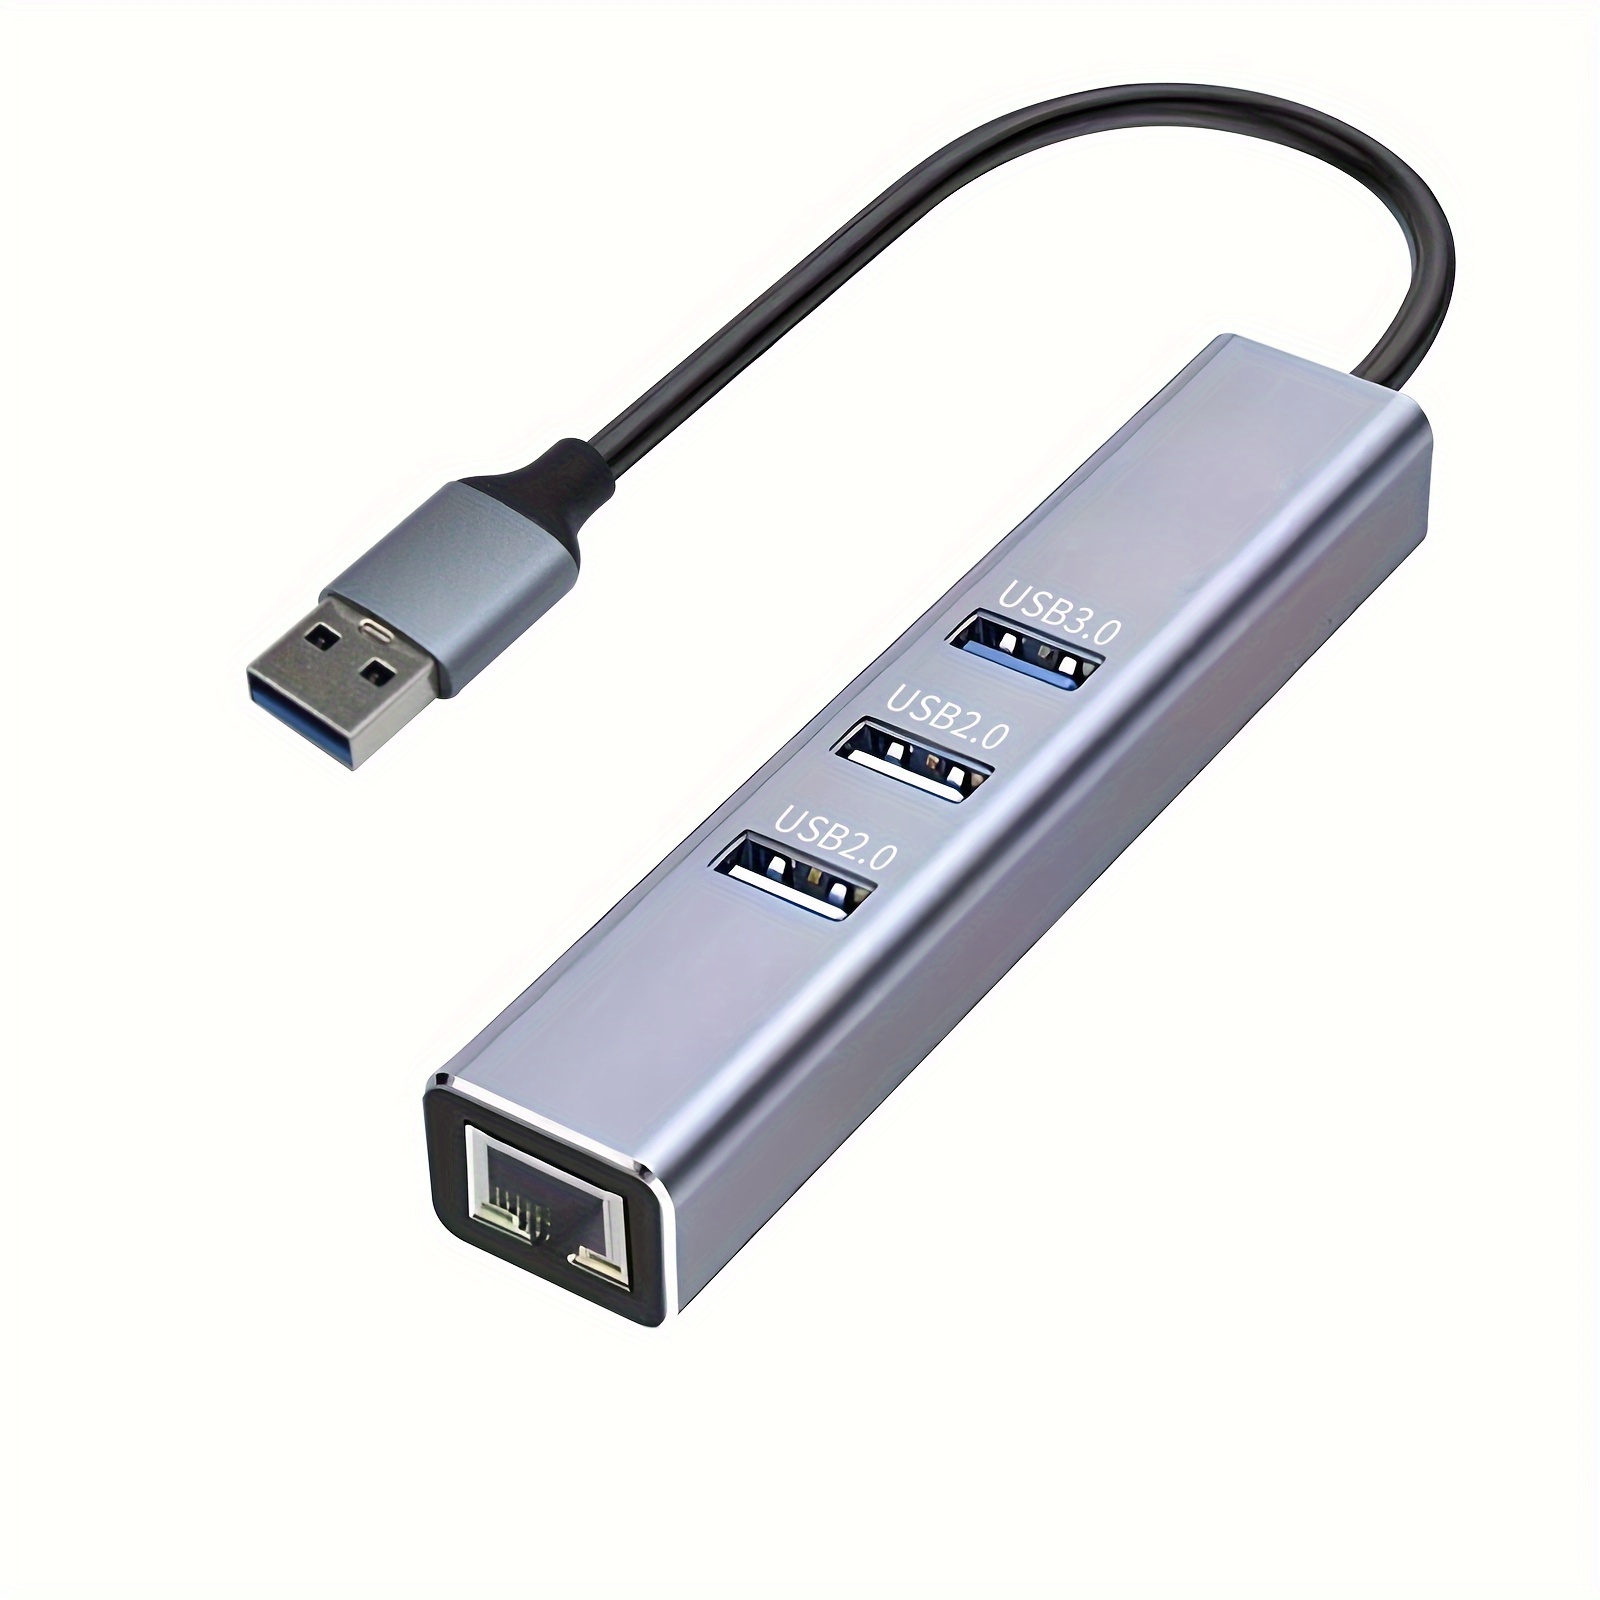 USB 2.0 to RJ45 100Mbps Cable Adapter 